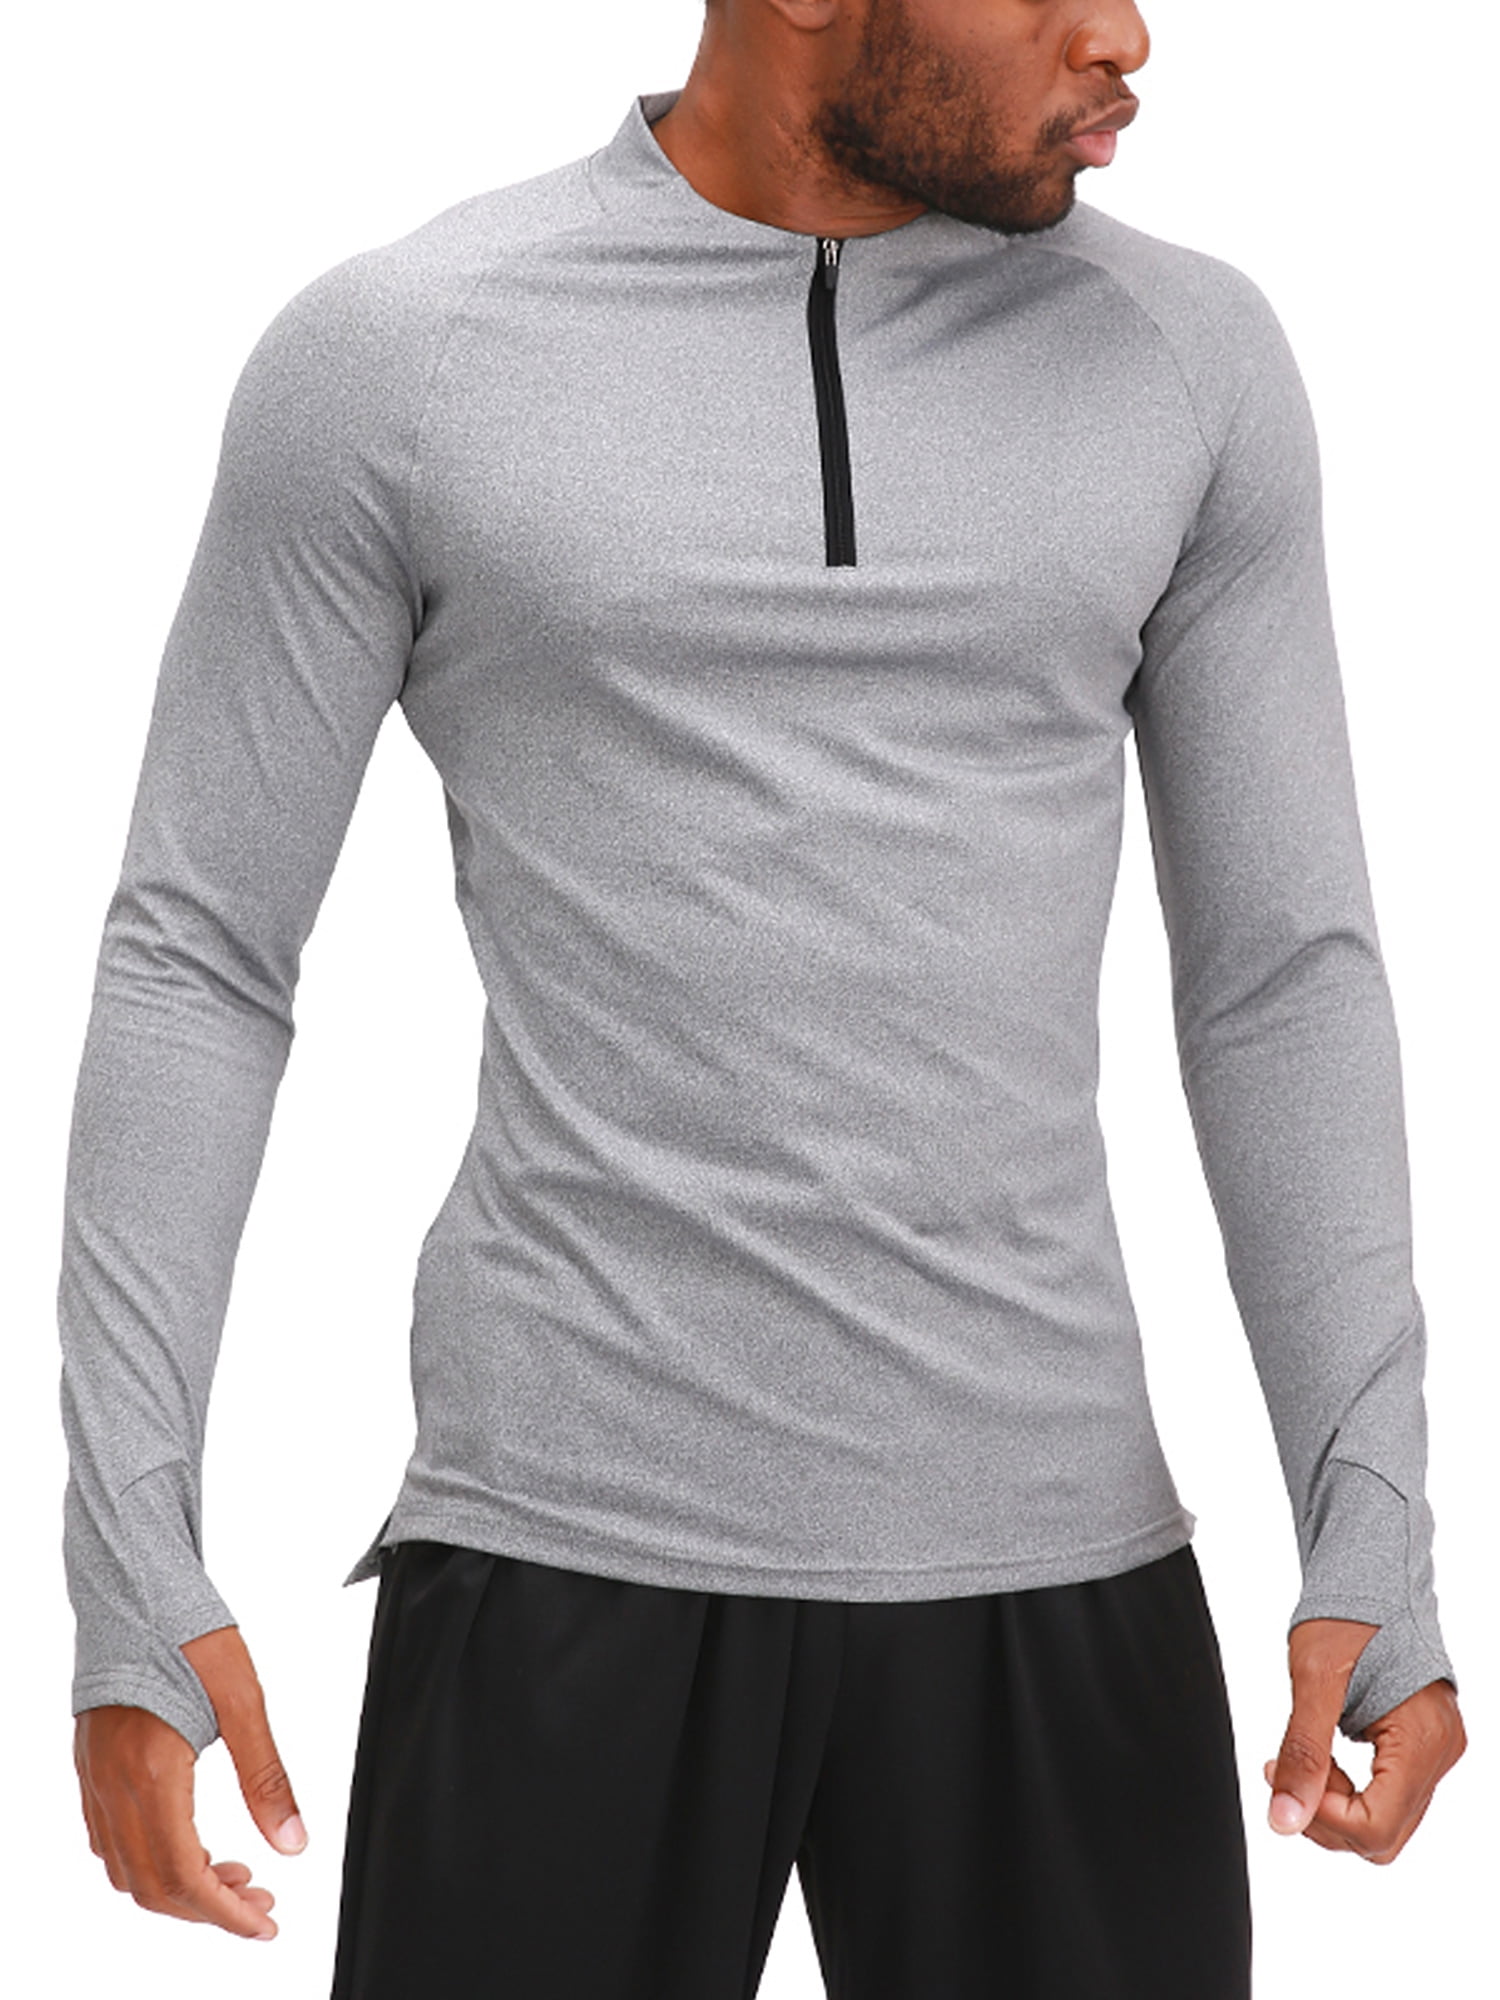 hower Men Casual Fashion 1/4 Zip Athletic Pullover Long Sleeve Dry Fit Running Active Shirts